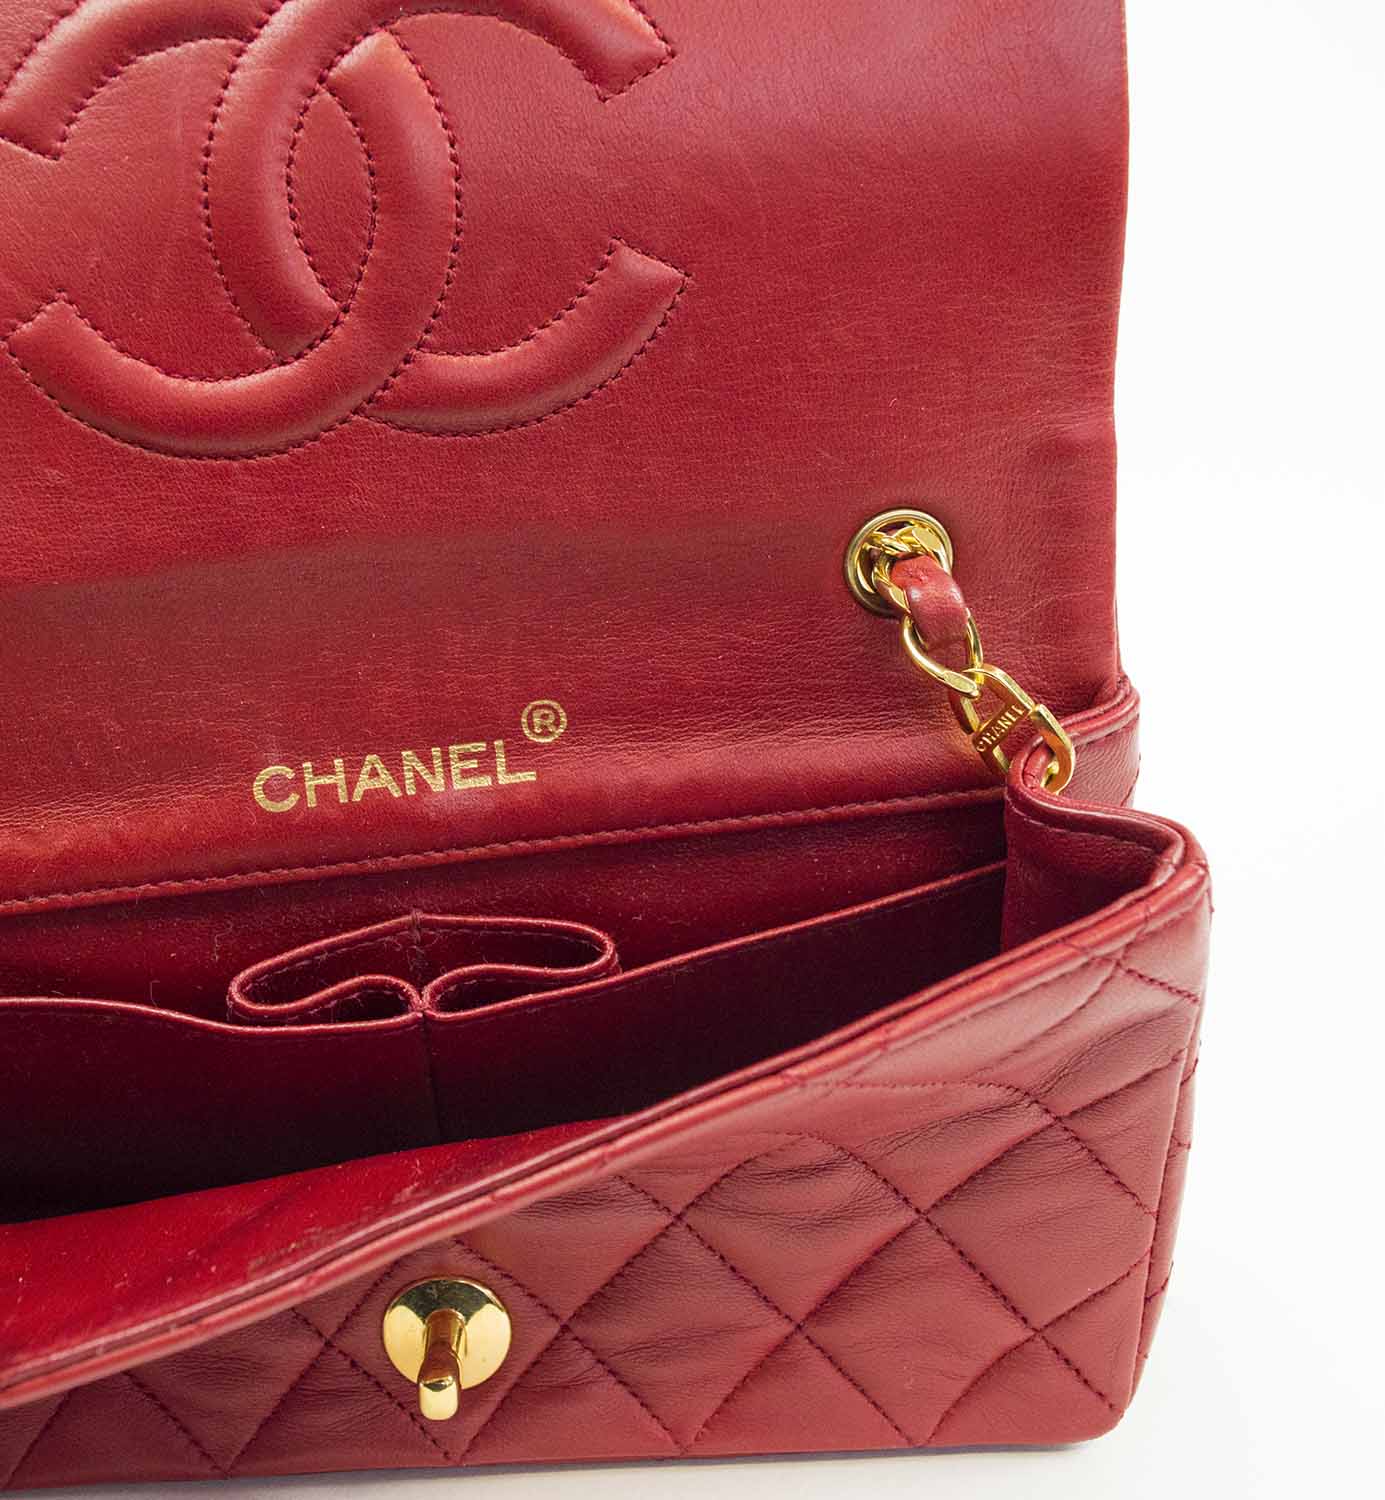 CHANEL MINI FLAP BAG, quilted red leather with gold tone hardware ...